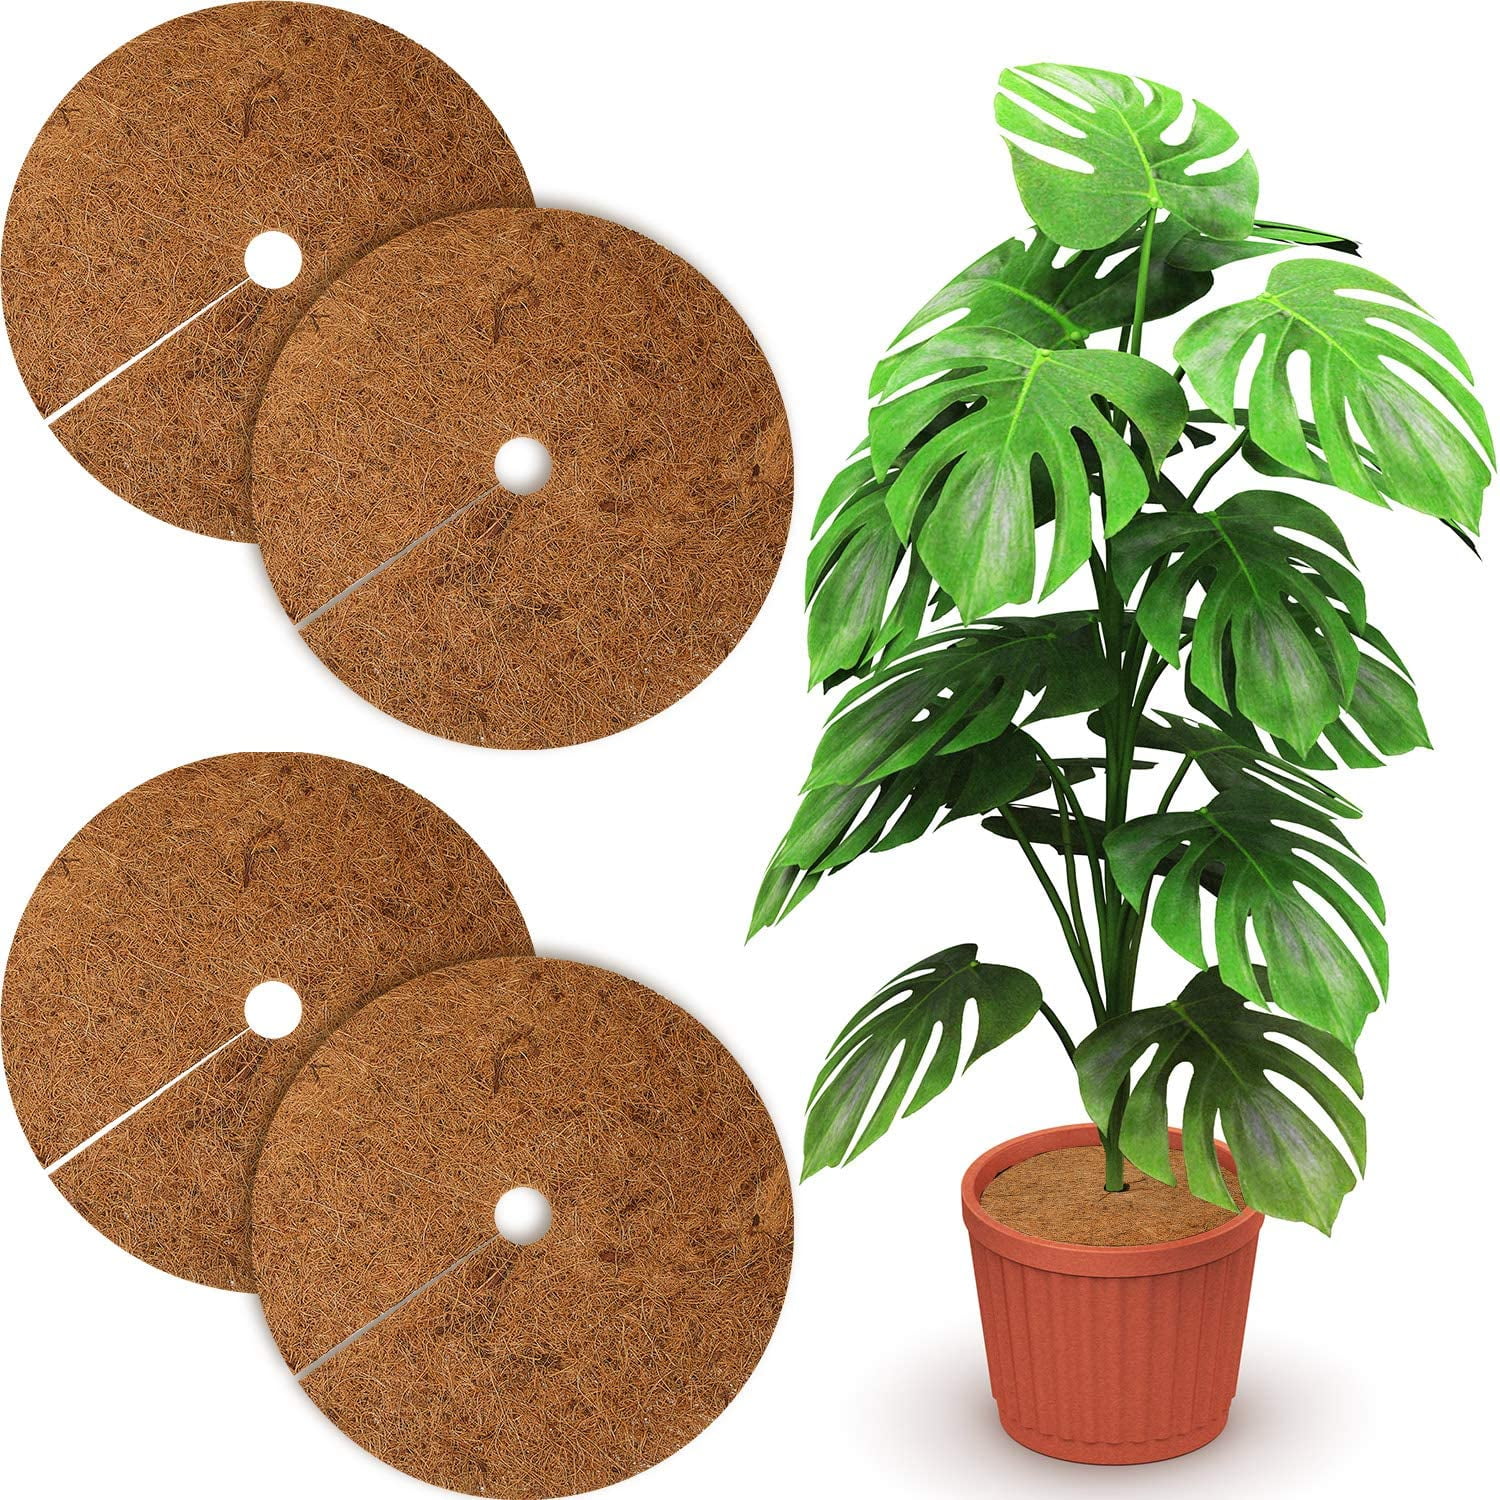 Awtang 10PCS Coconut Mulch Cover Mulch Disc Plant Cover for Gardening,20CM regular 